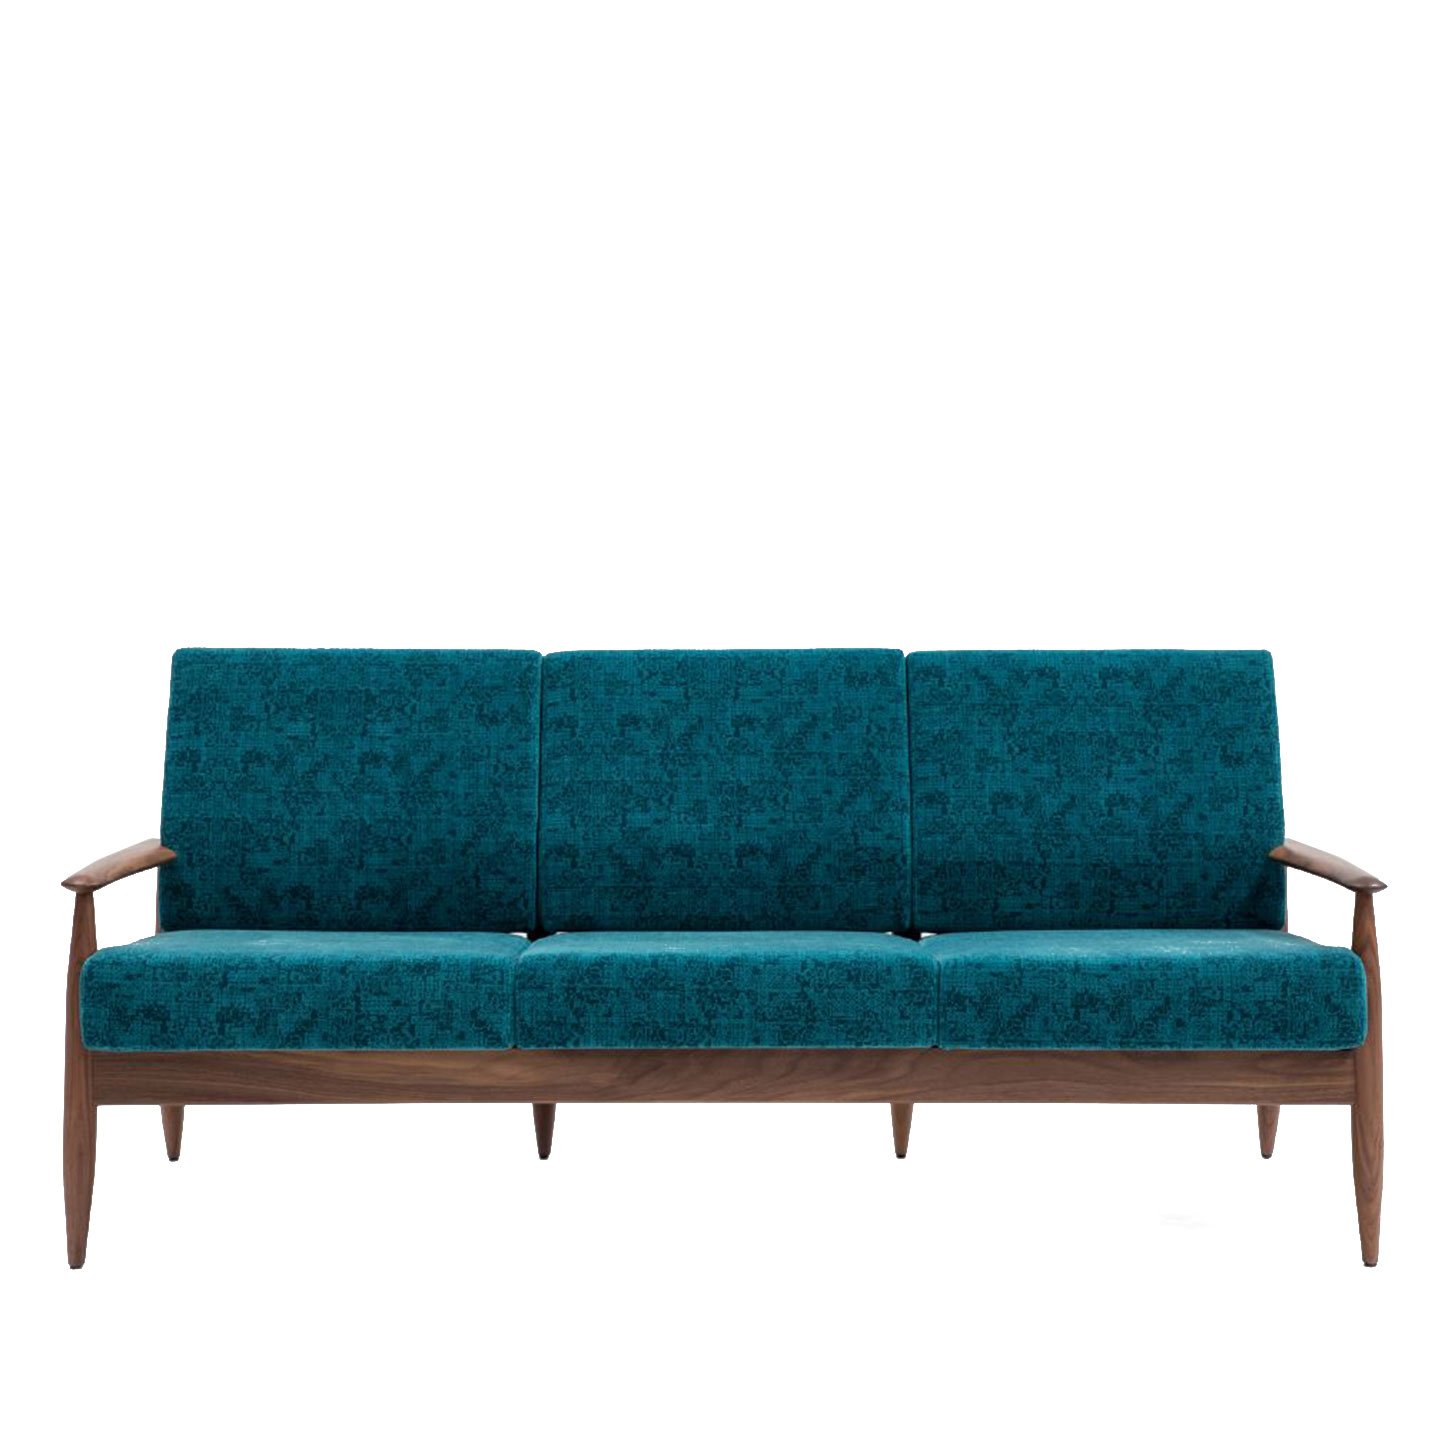 Haworth Buzzi Nordic ST100 lounge sofa in teal blue color